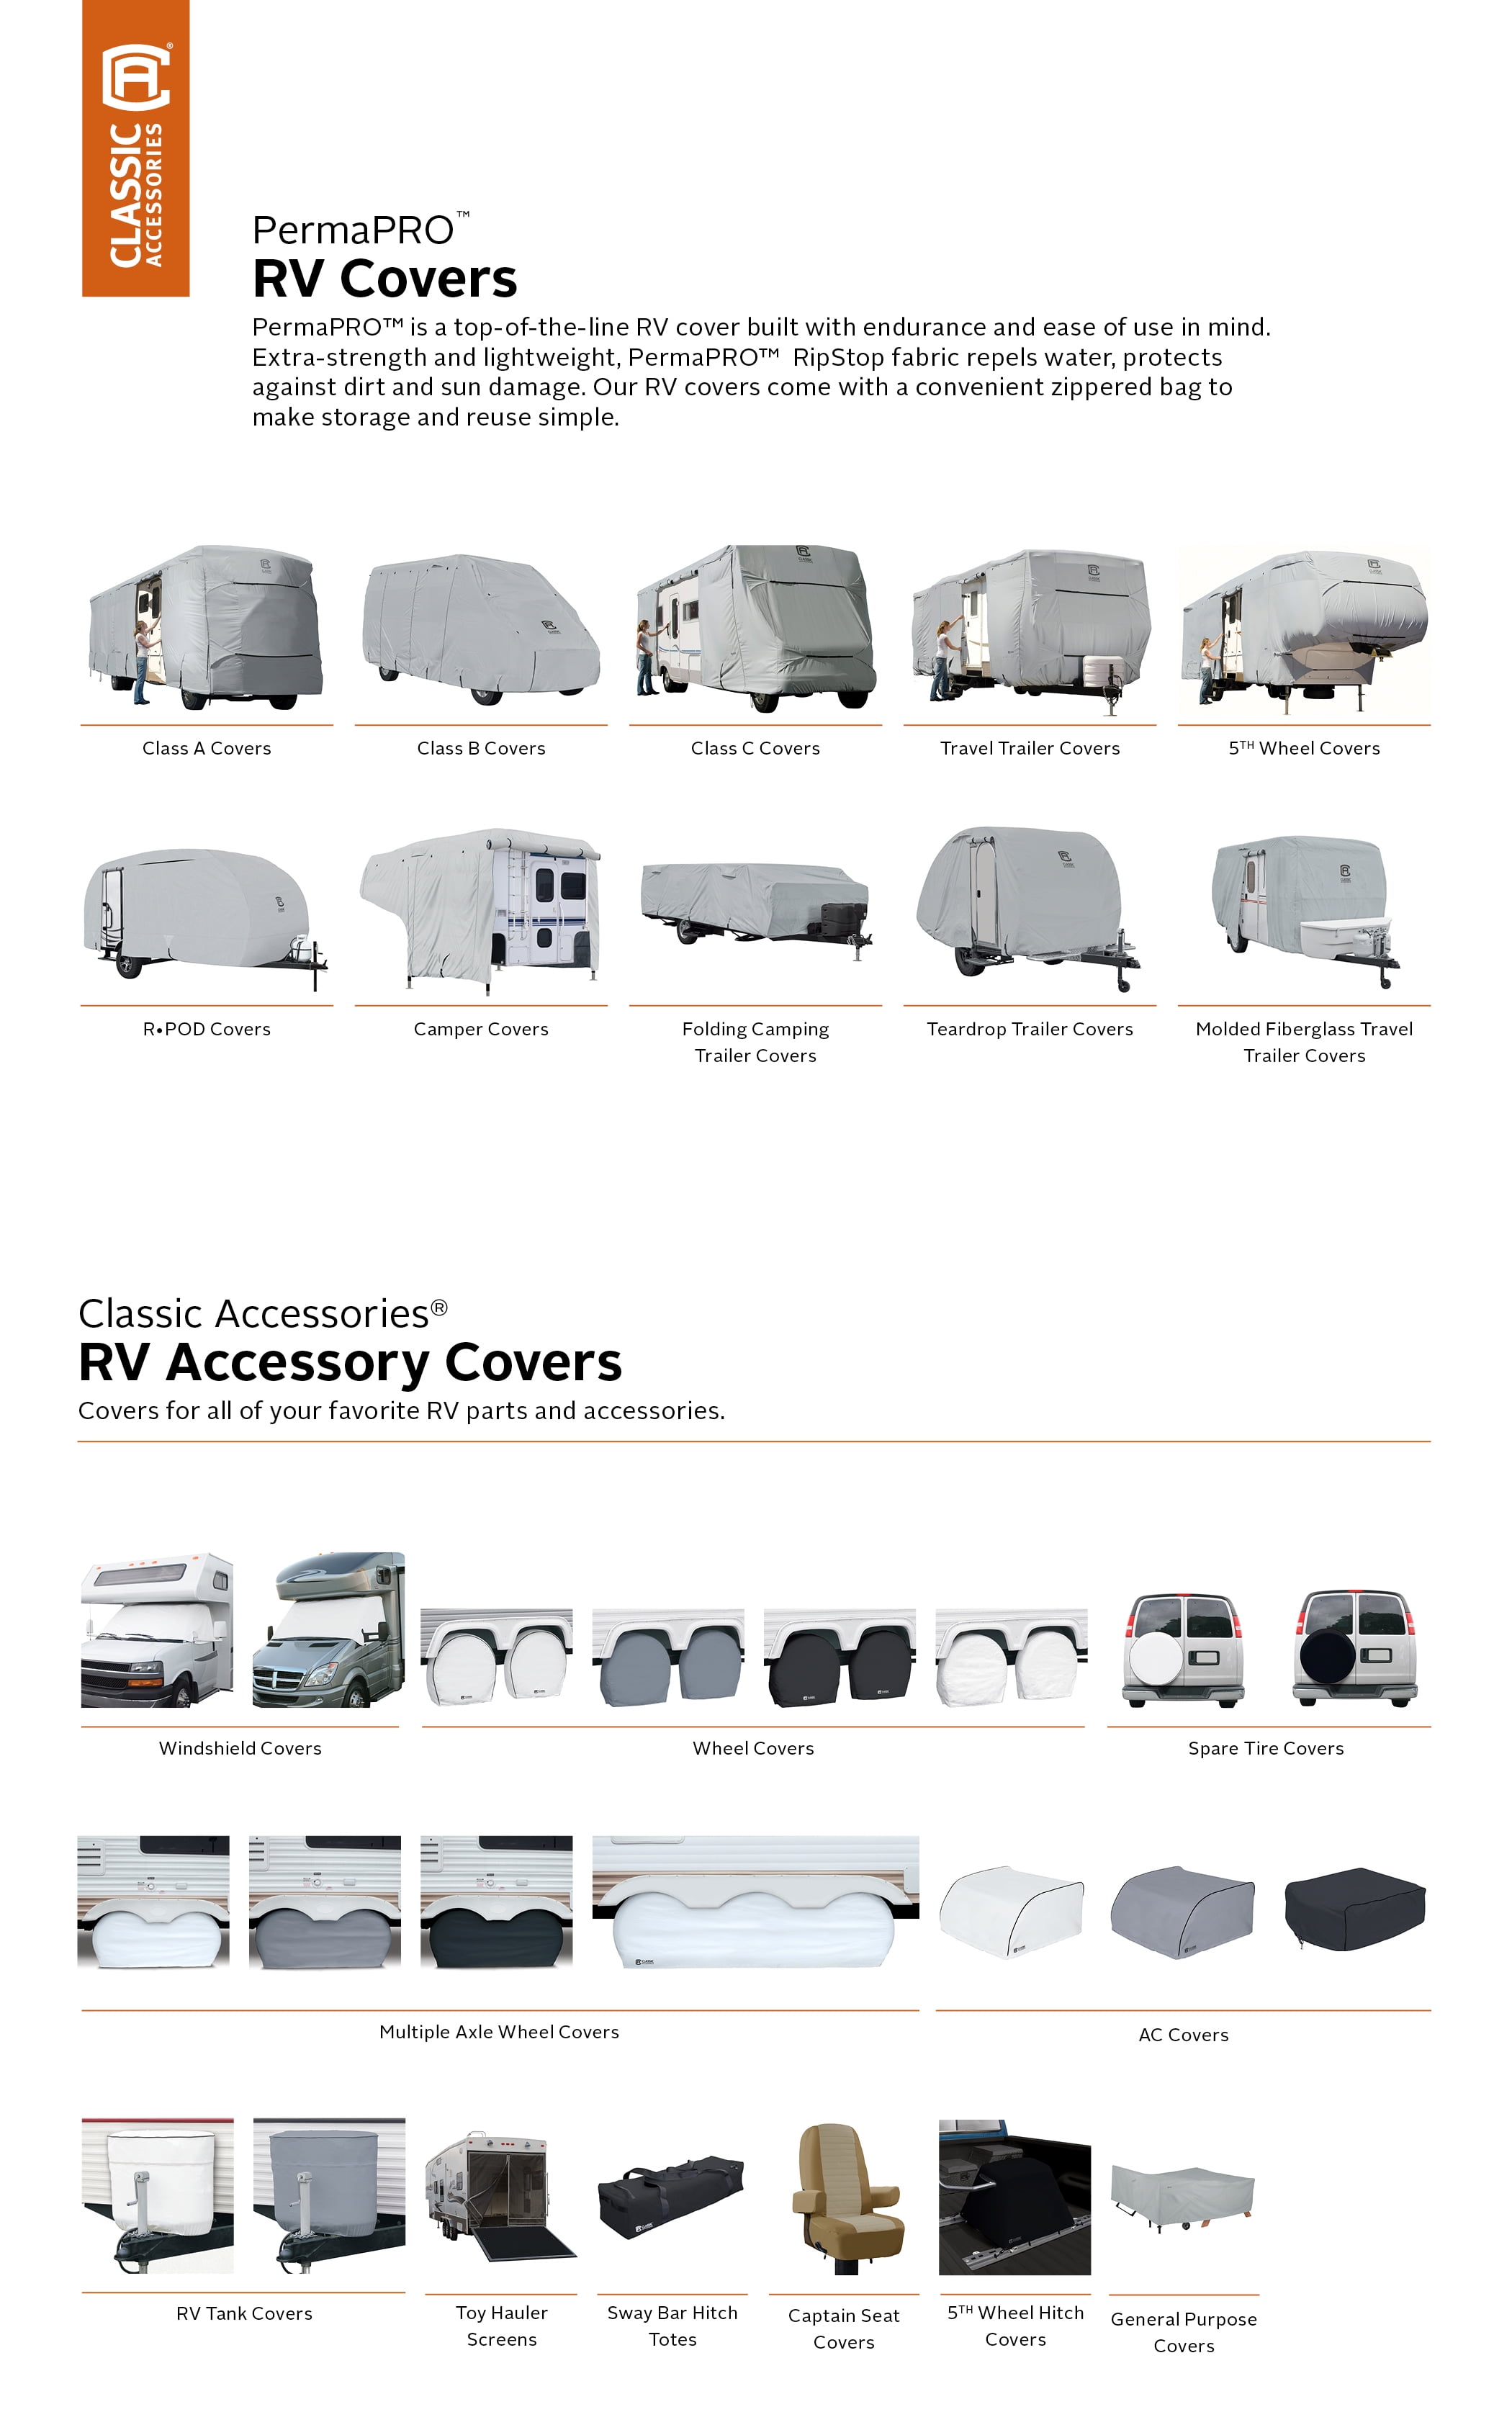 10 Must-Have Aftermarket RV Parts And Accessories